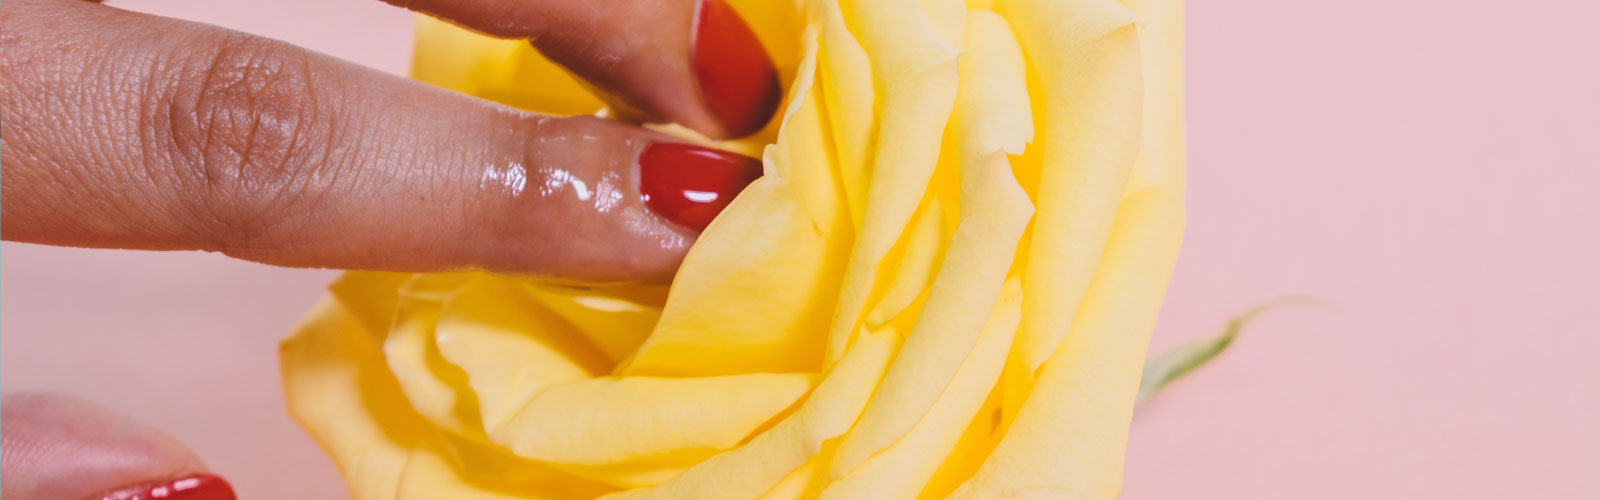 Woman's fingers on centre of rose